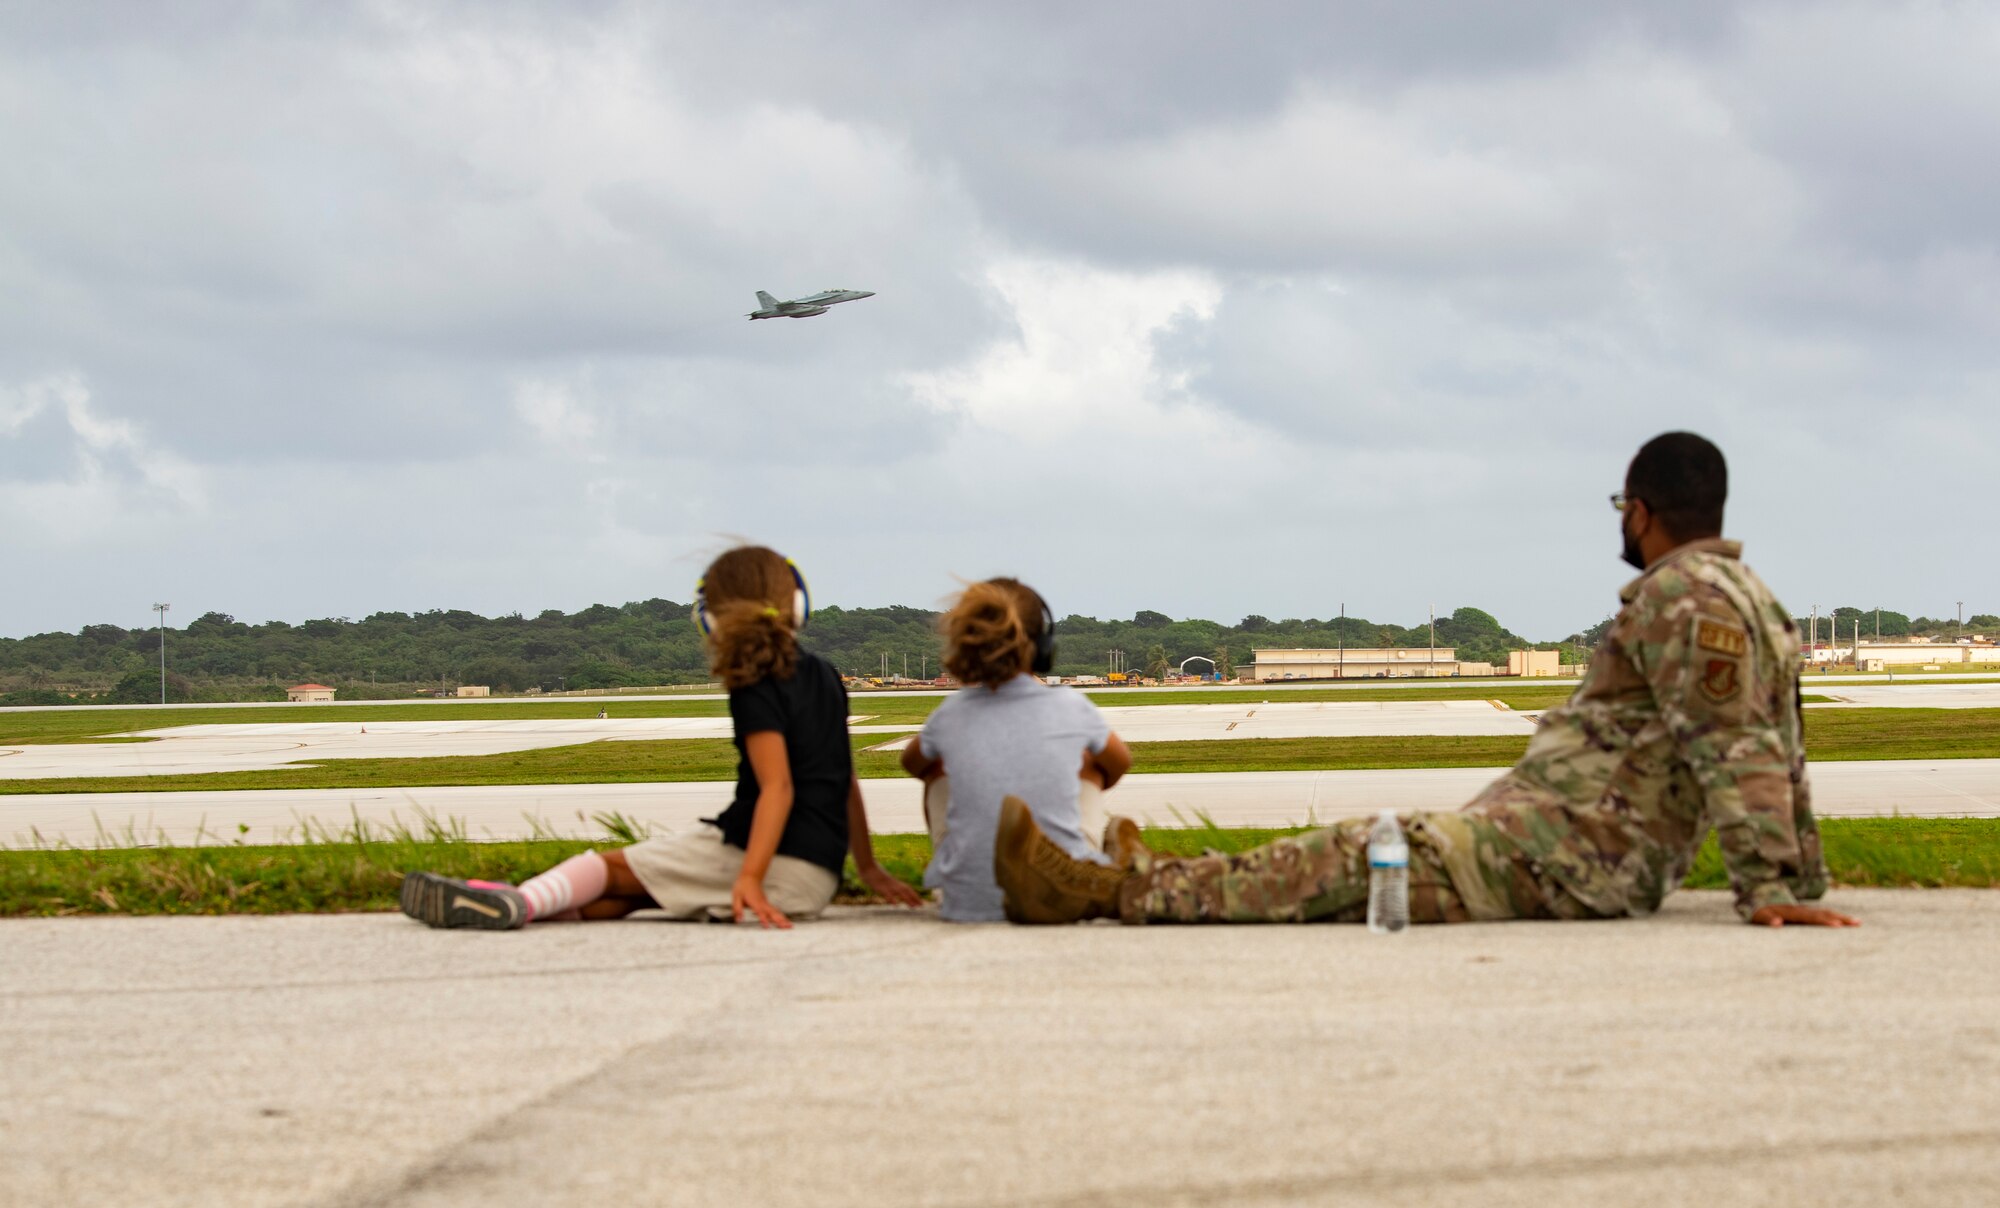 U.S. Air Force Senior Master Sgt. Philip Washington, 36th Wing Safety superintendent and his two daughters watch aircraft take off from Andersen Air Force Base, Guam, during a take-off viewing day for exercise Cope North 22, Feb. 9, 2022. Service members, their families and civic leaders were invited to the flight line to learn the importance of Cope North while observing aircraft capabilities.  Exercise Cope North is the U.S. Pacific Air Forces’ largest multilateral exercise and includes more than 2, 500 U.S. Airmen, Marines, and Sailors working alongside 1,000 combined Japan Air Self-Defense Force and Royal Australian Air Force counterparts.